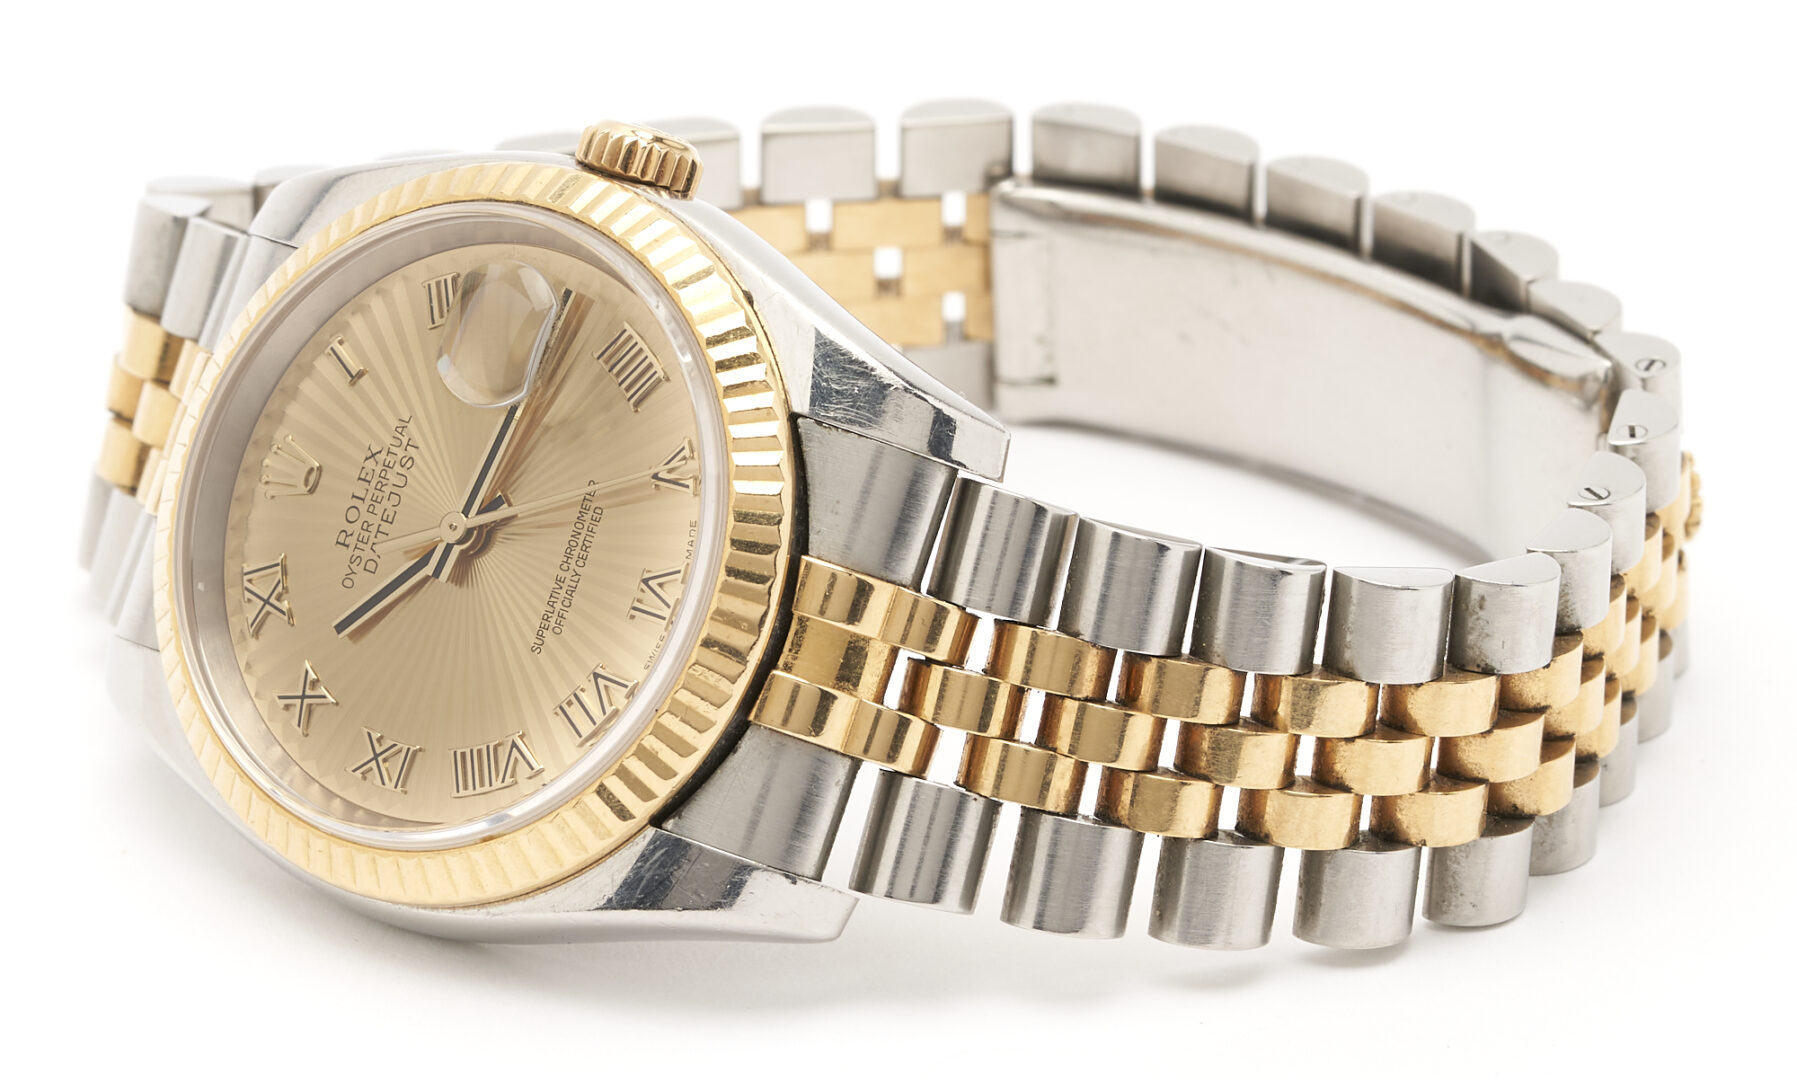 Lot 23: Rolex Oyster Perpetual Datejust Two-Tone Wristwatch